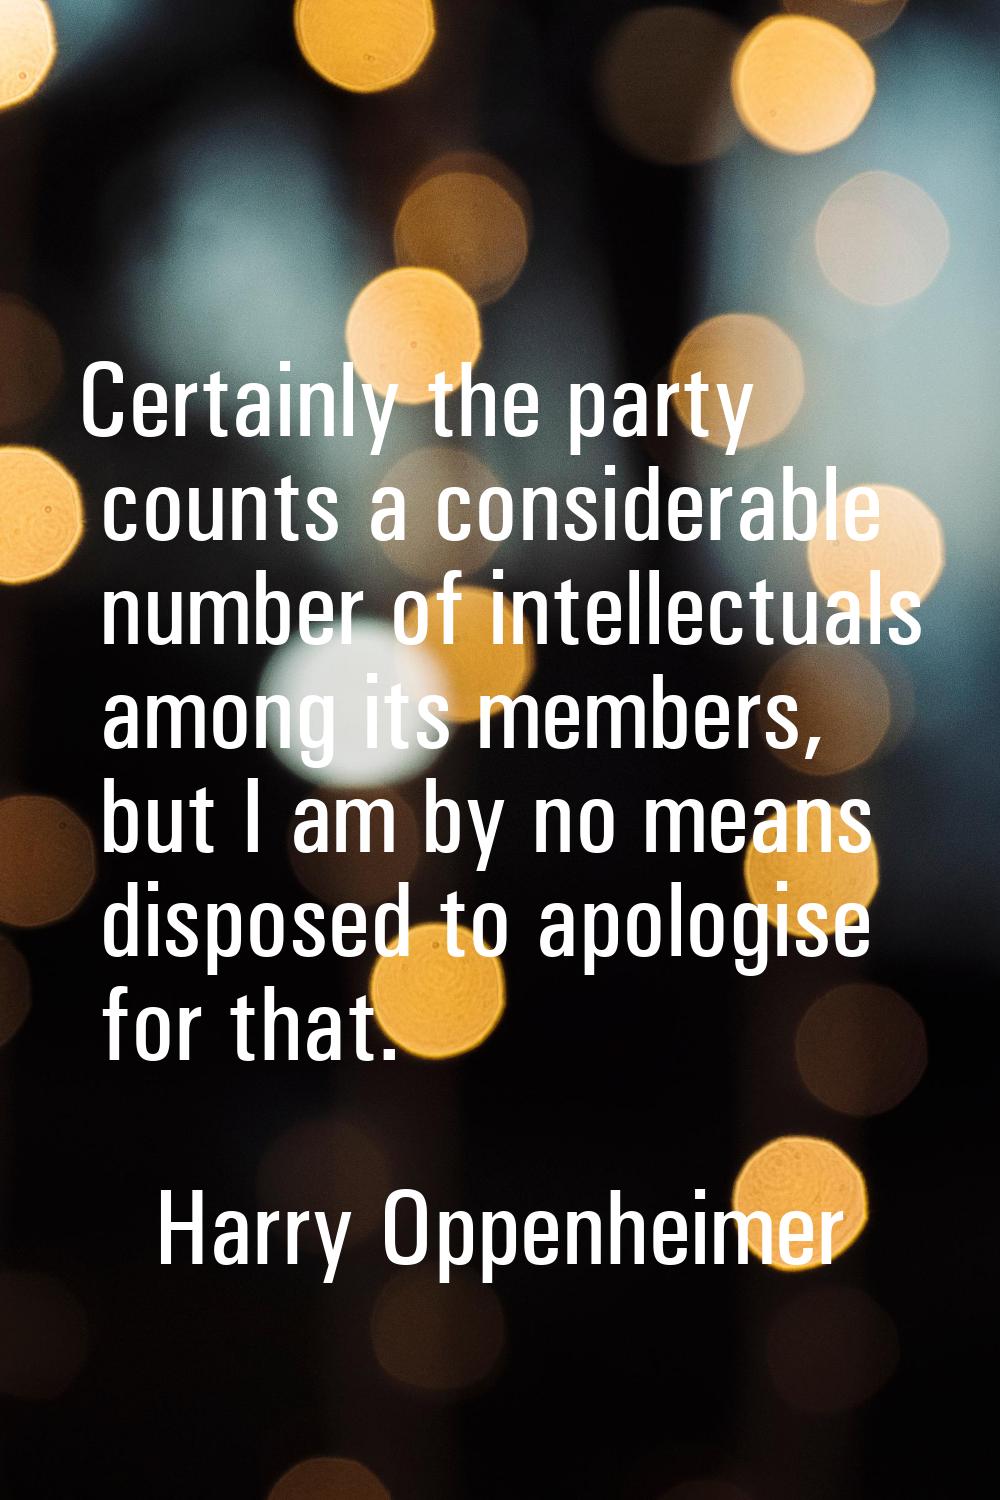 Certainly the party counts a considerable number of intellectuals among its members, but I am by no